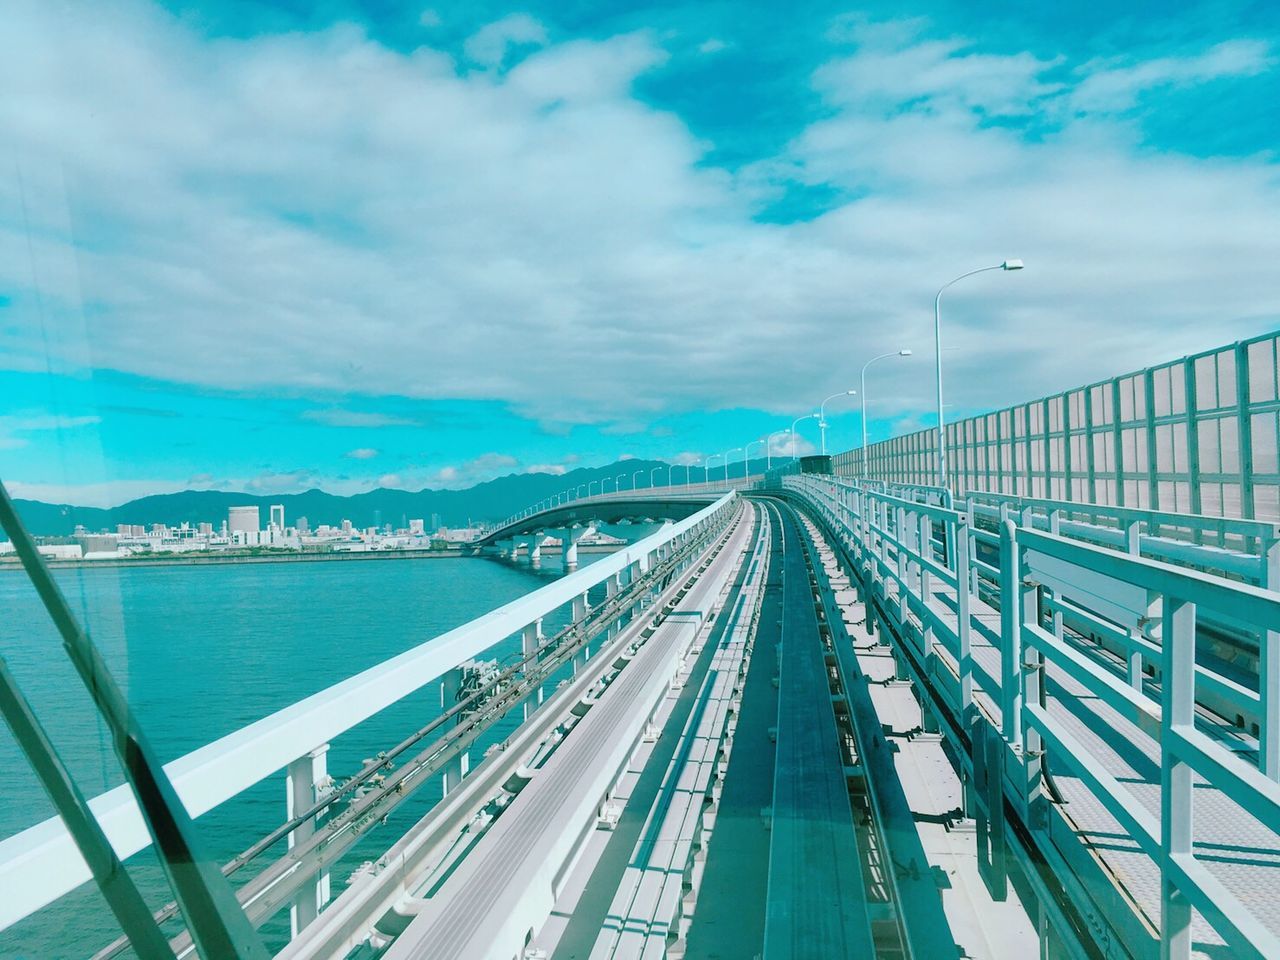 cloud - sky, sky, transportation, architecture, built structure, nature, day, connection, no people, bridge, water, bridge - man made structure, mode of transportation, rail transportation, city, high angle view, outdoors, travel, building exterior, track, multiple lane highway